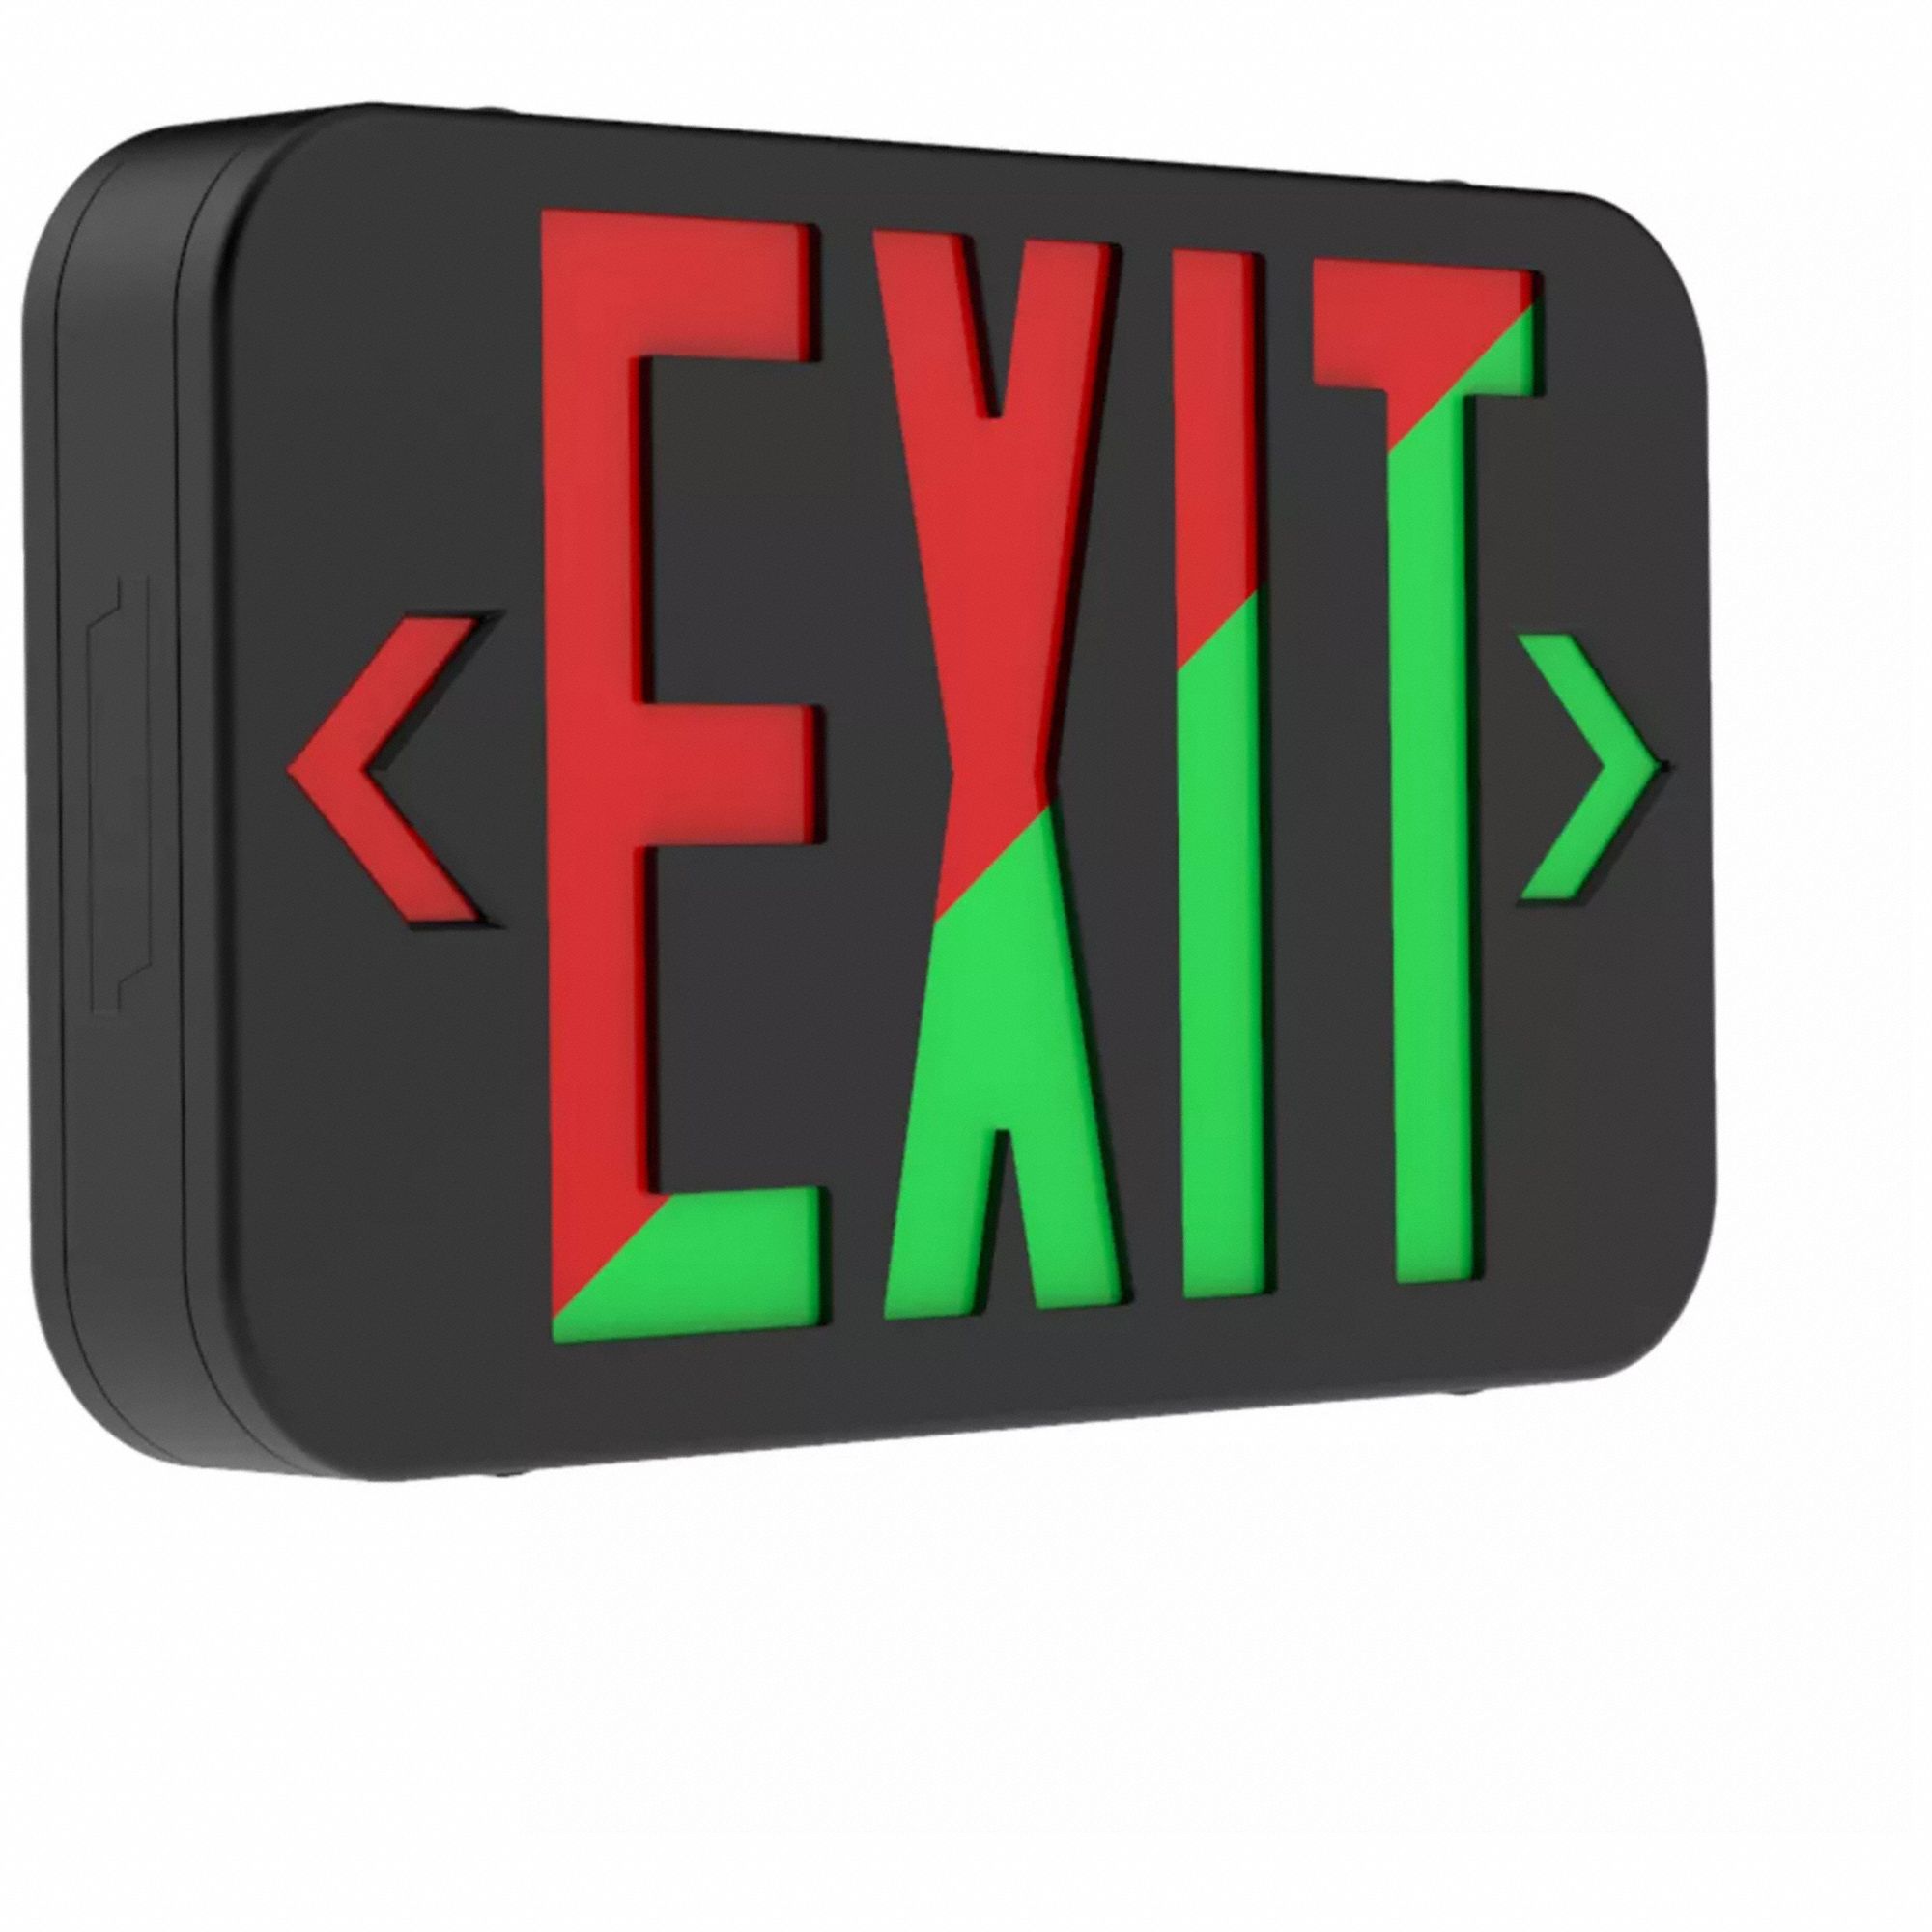 Are Exit Signs Required In Conference Rooms